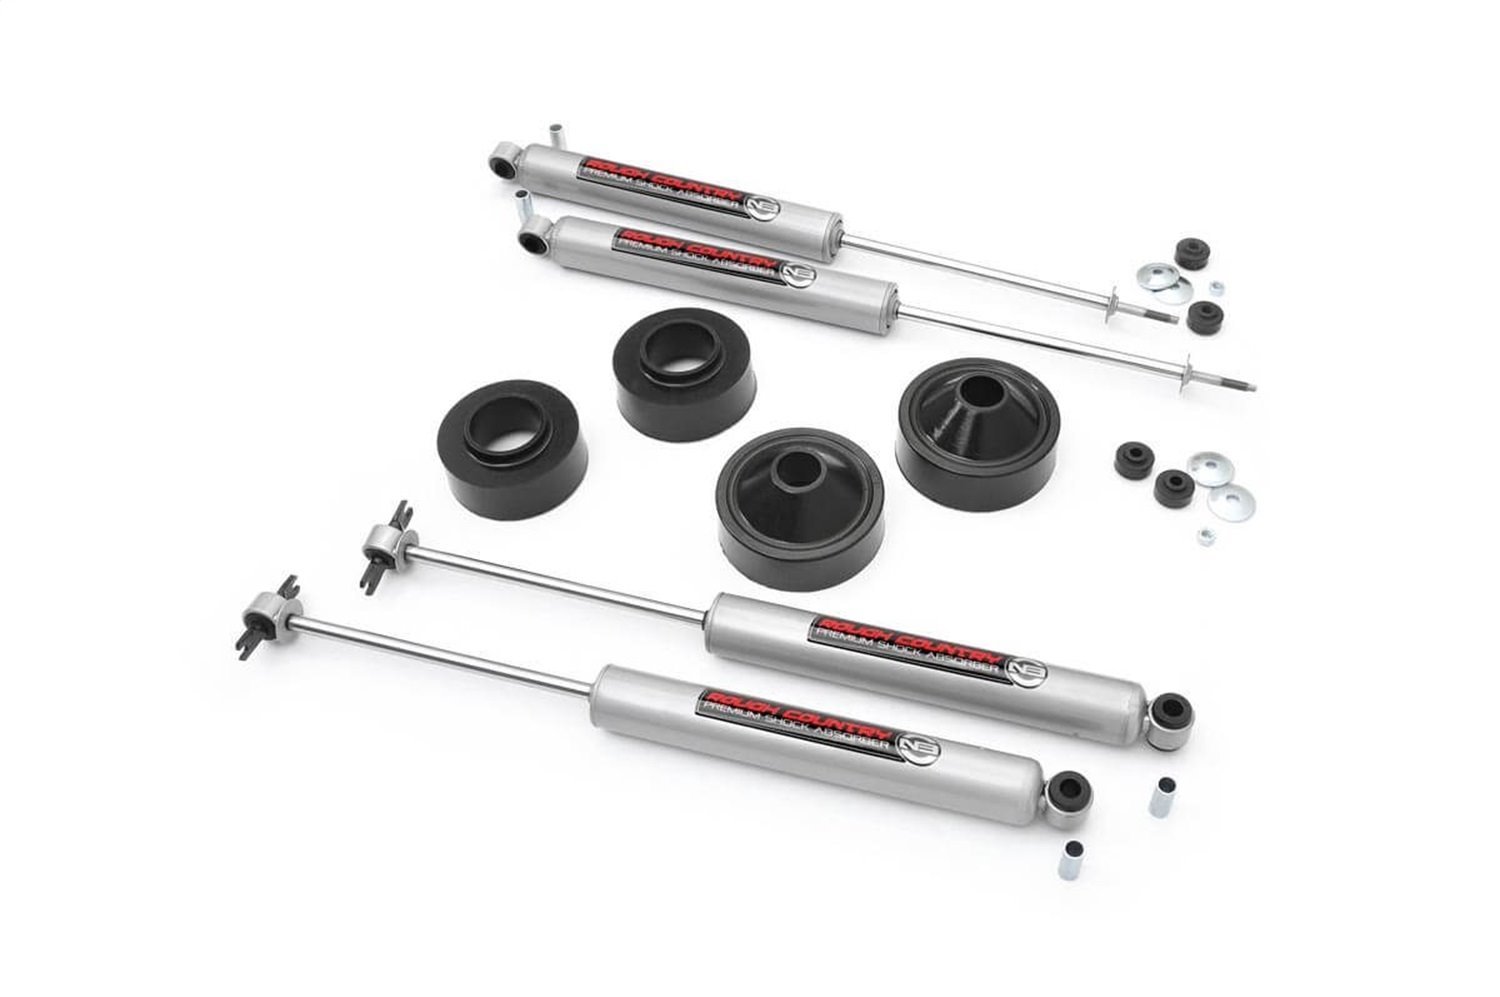 65130 Front and Rear Suspension Lift Kit, Lift Amount: 1.75 in. Front/1.75 in. Rear